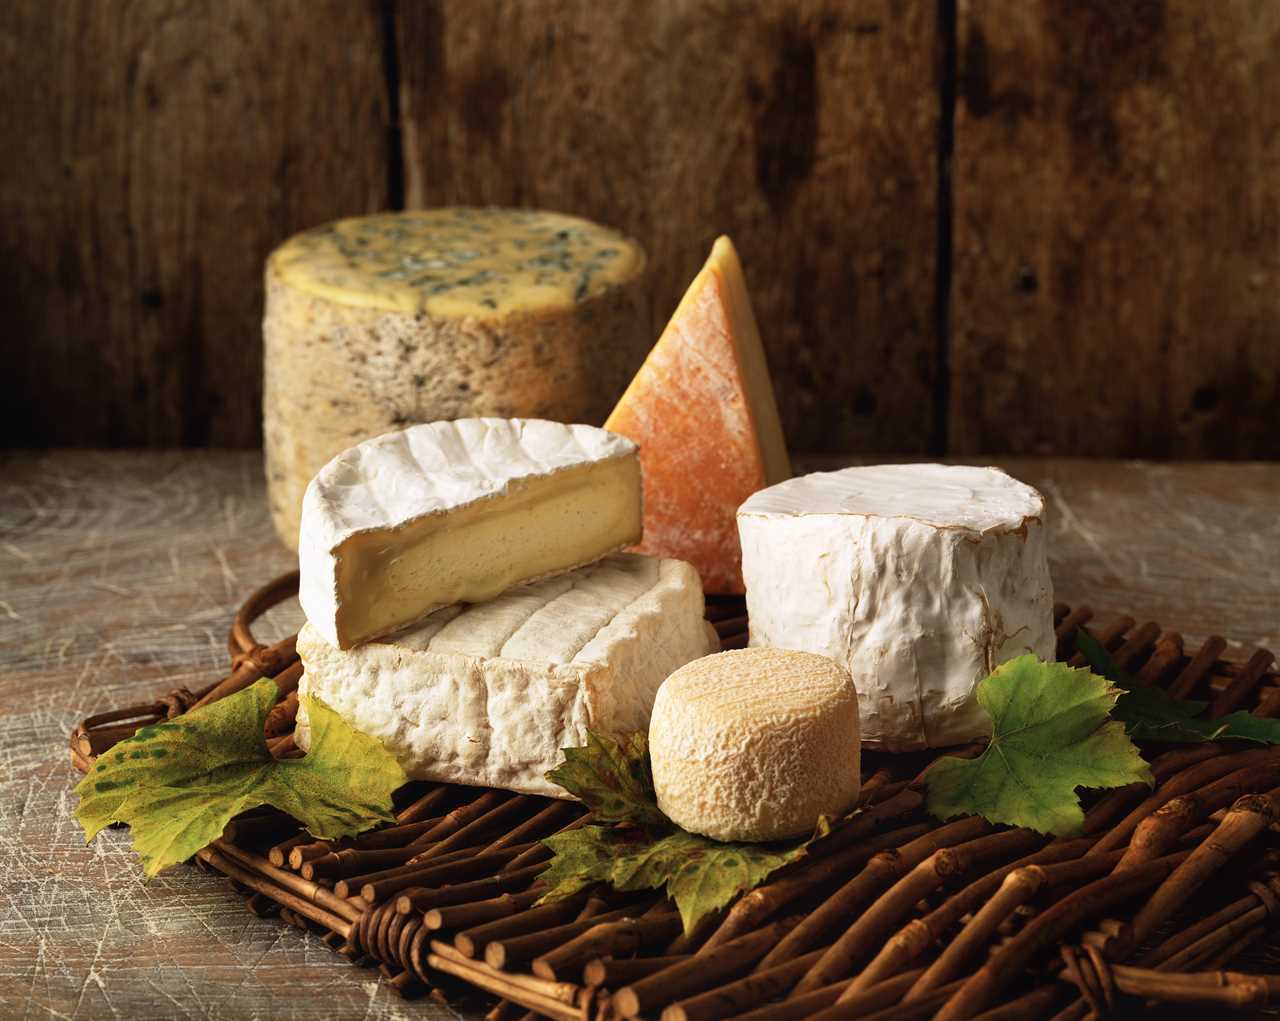 Welsh Labour officials splurge over £4,000 on gourmet cheese